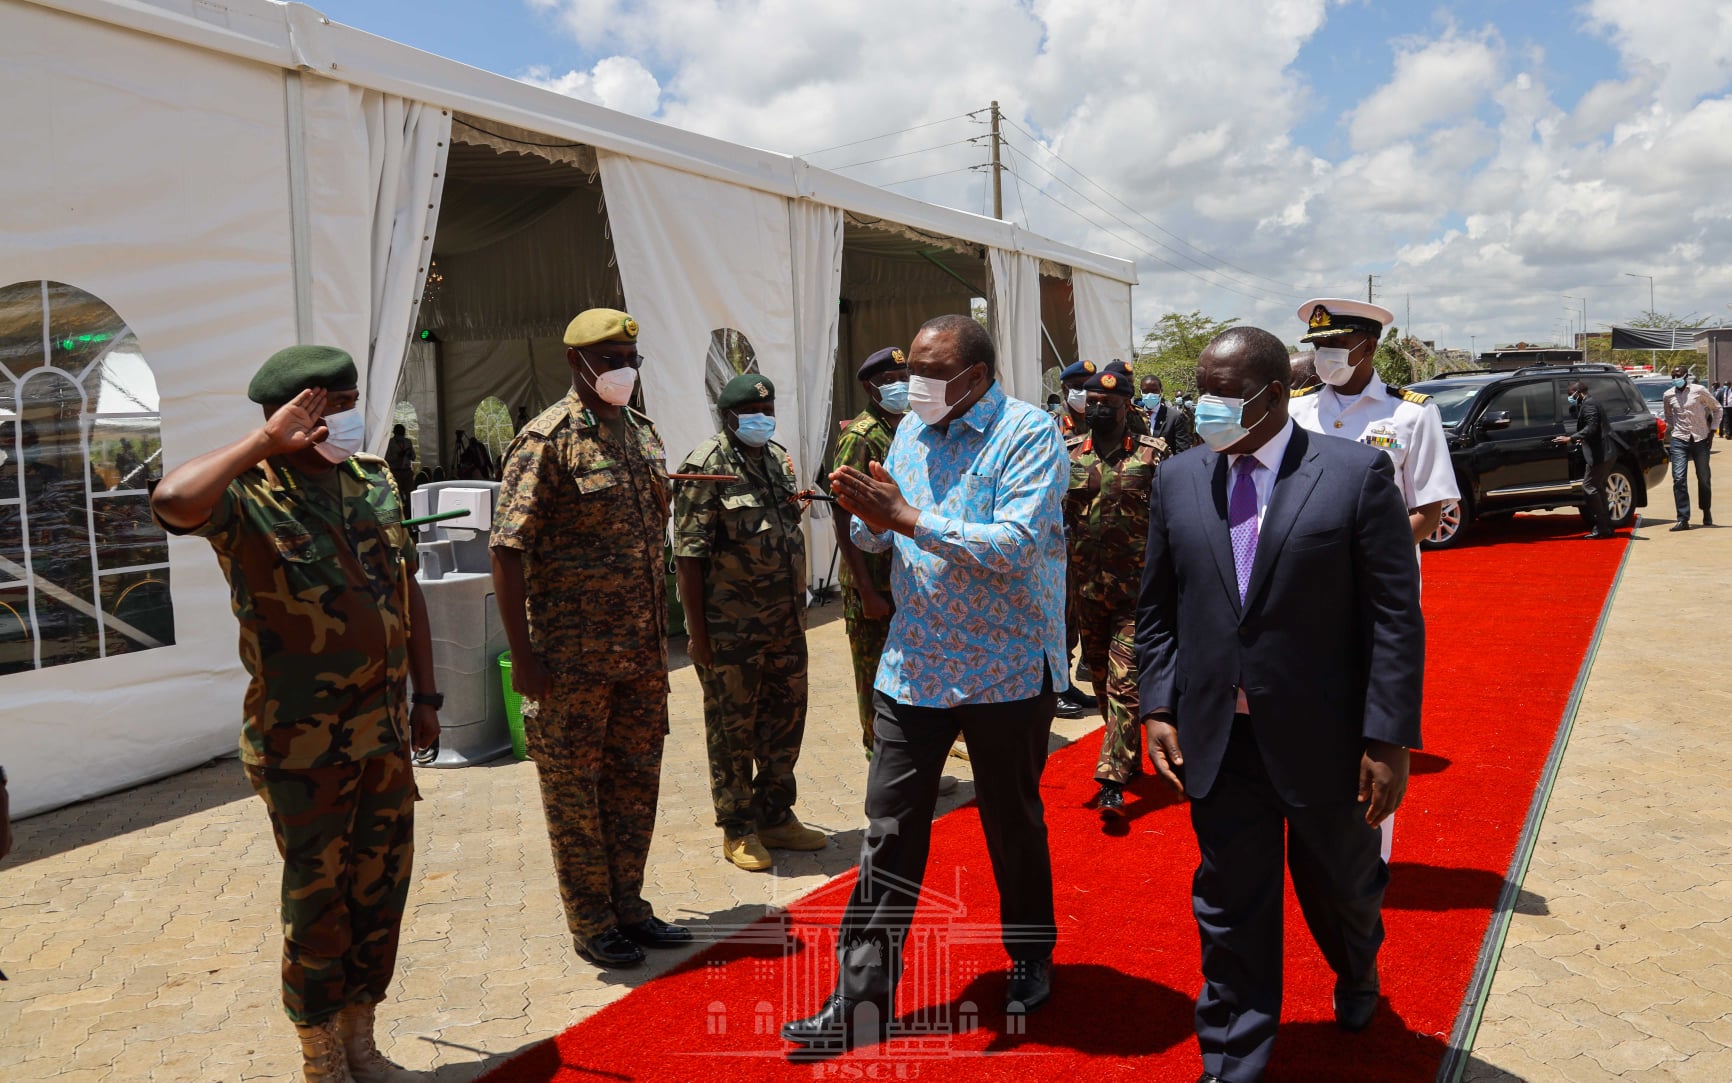 President Uhuru Kenyatta and Interior CS Fred Matiang'i arrive at the National Security Industries in Ruiru, Kiambu County to commission the Small Arms Factory on April 8, 2021. |Courtesy| PSCU|